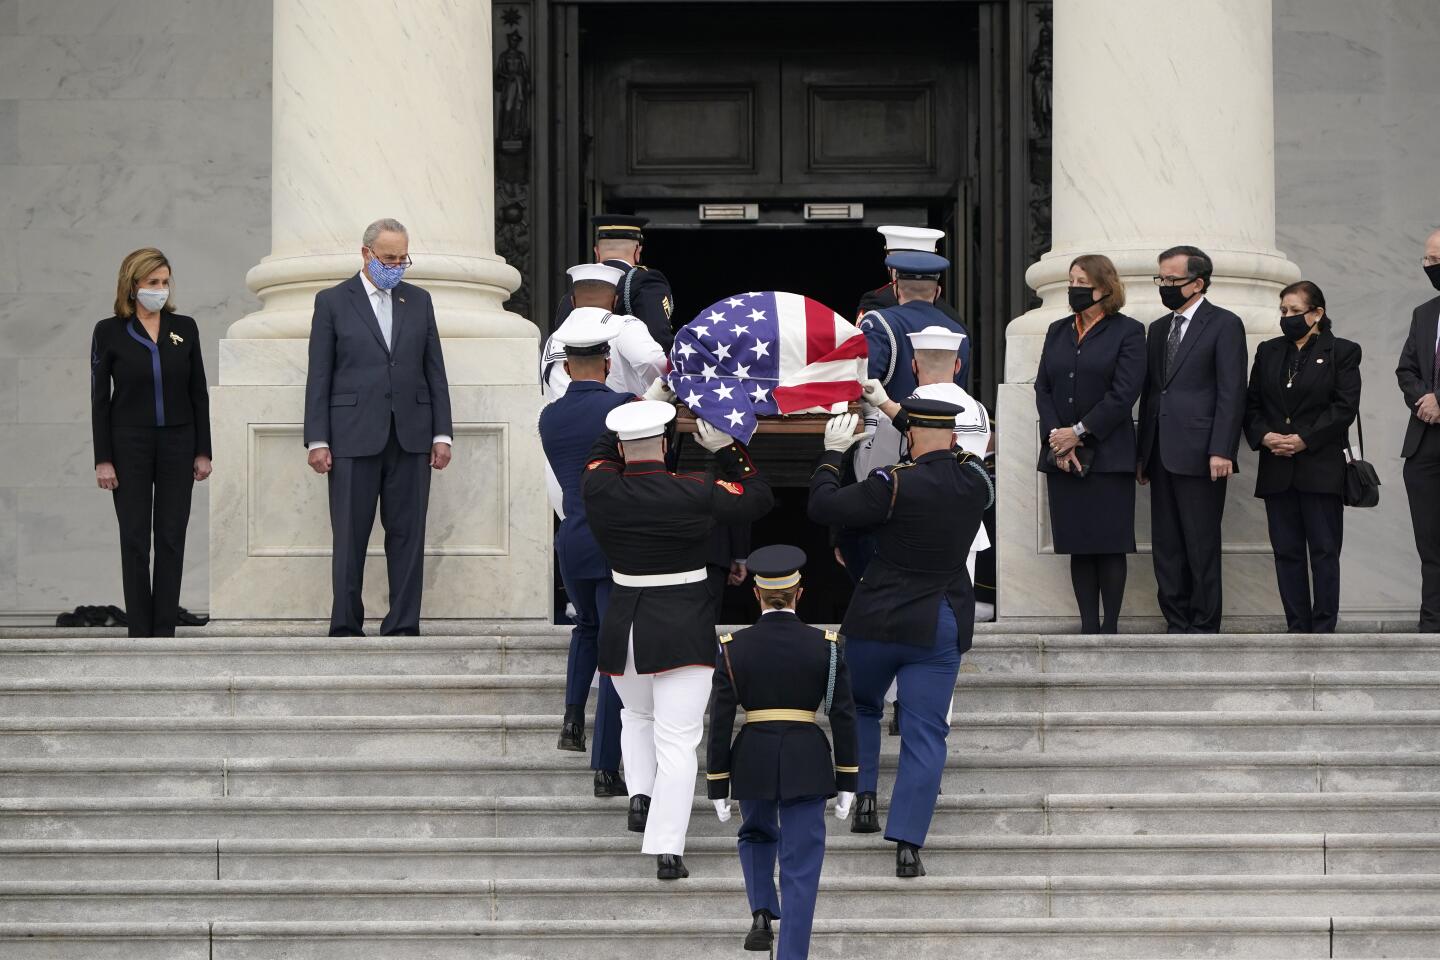 The casket of Justice Ruth Bader Ginsburg is carried by a military honor guard to lie in state at the U.S. Capitol